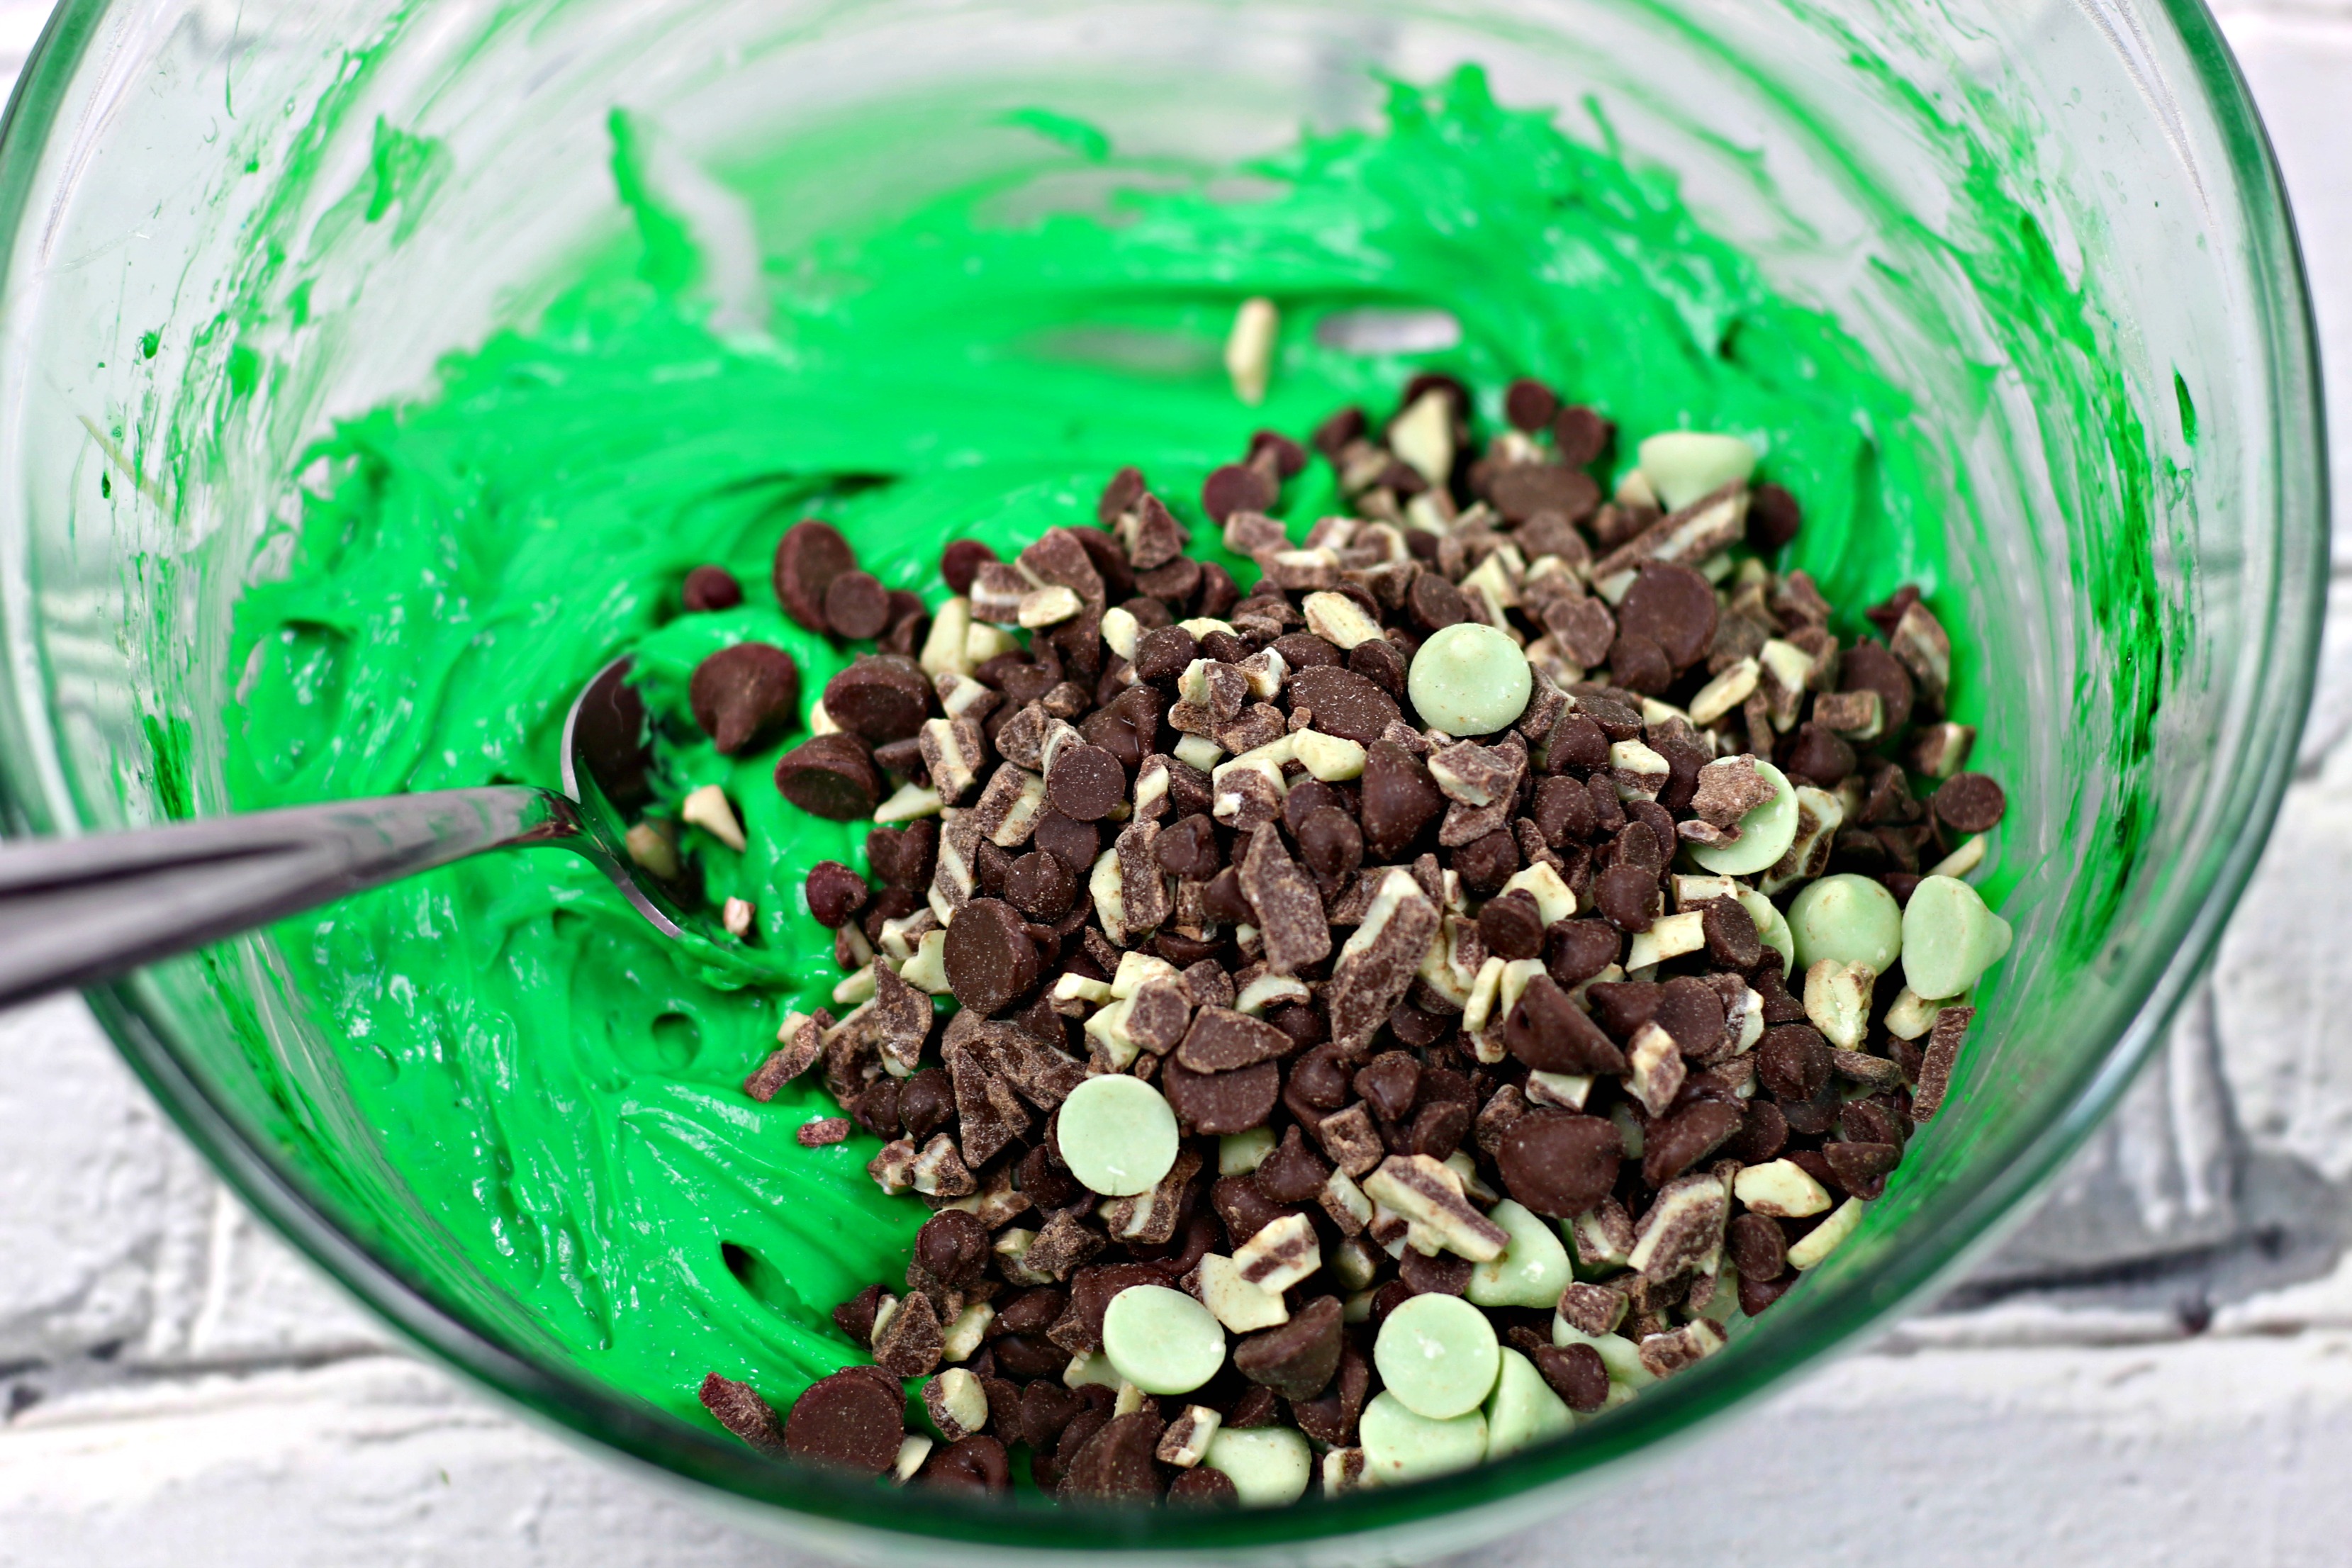 chocolate and mint chips in the cheesecake batter